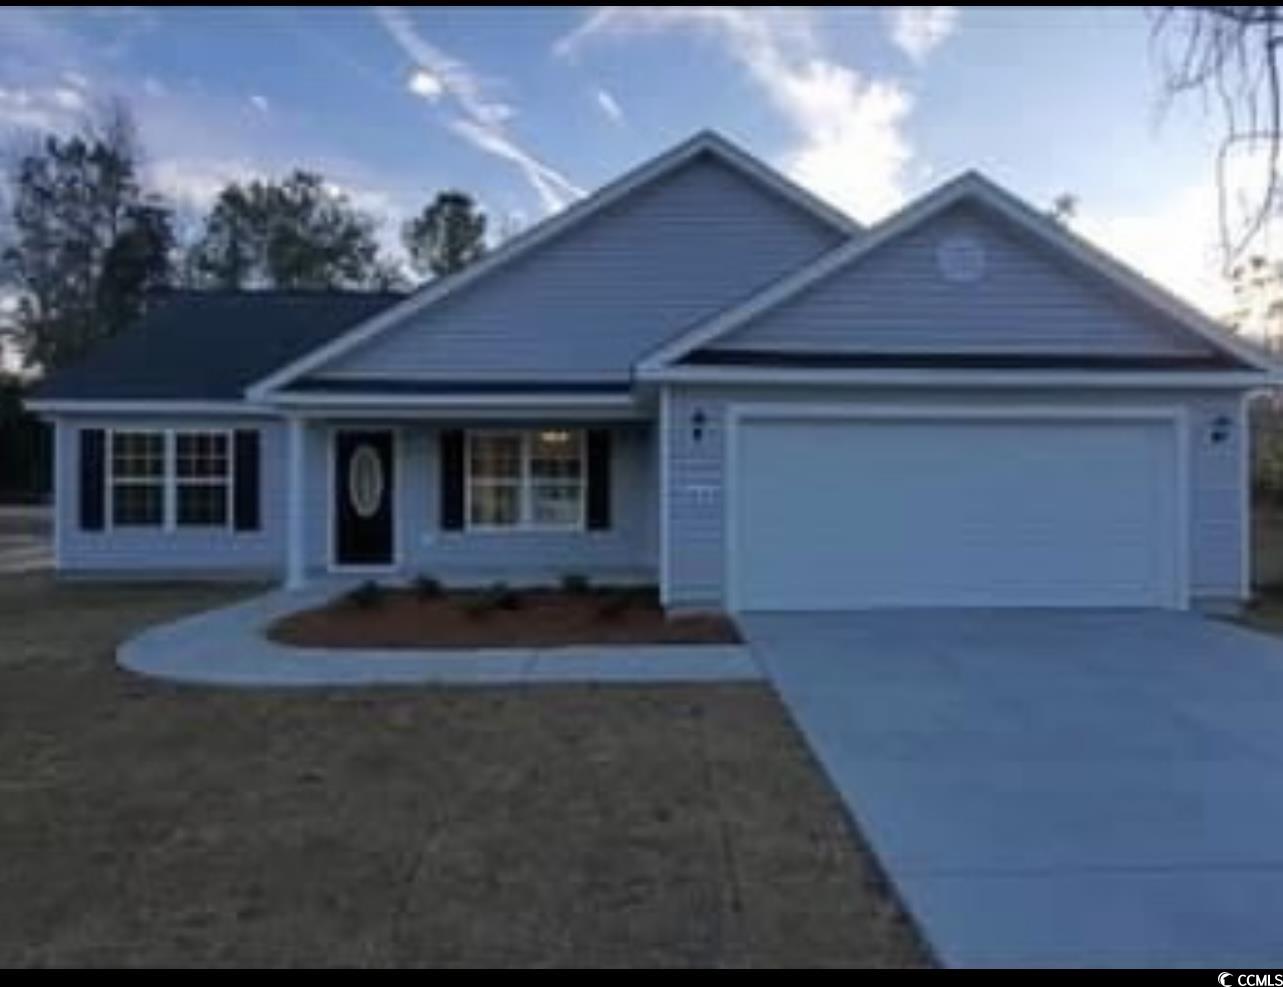 Lot 1 Privetts Rd. Conway, SC 29526